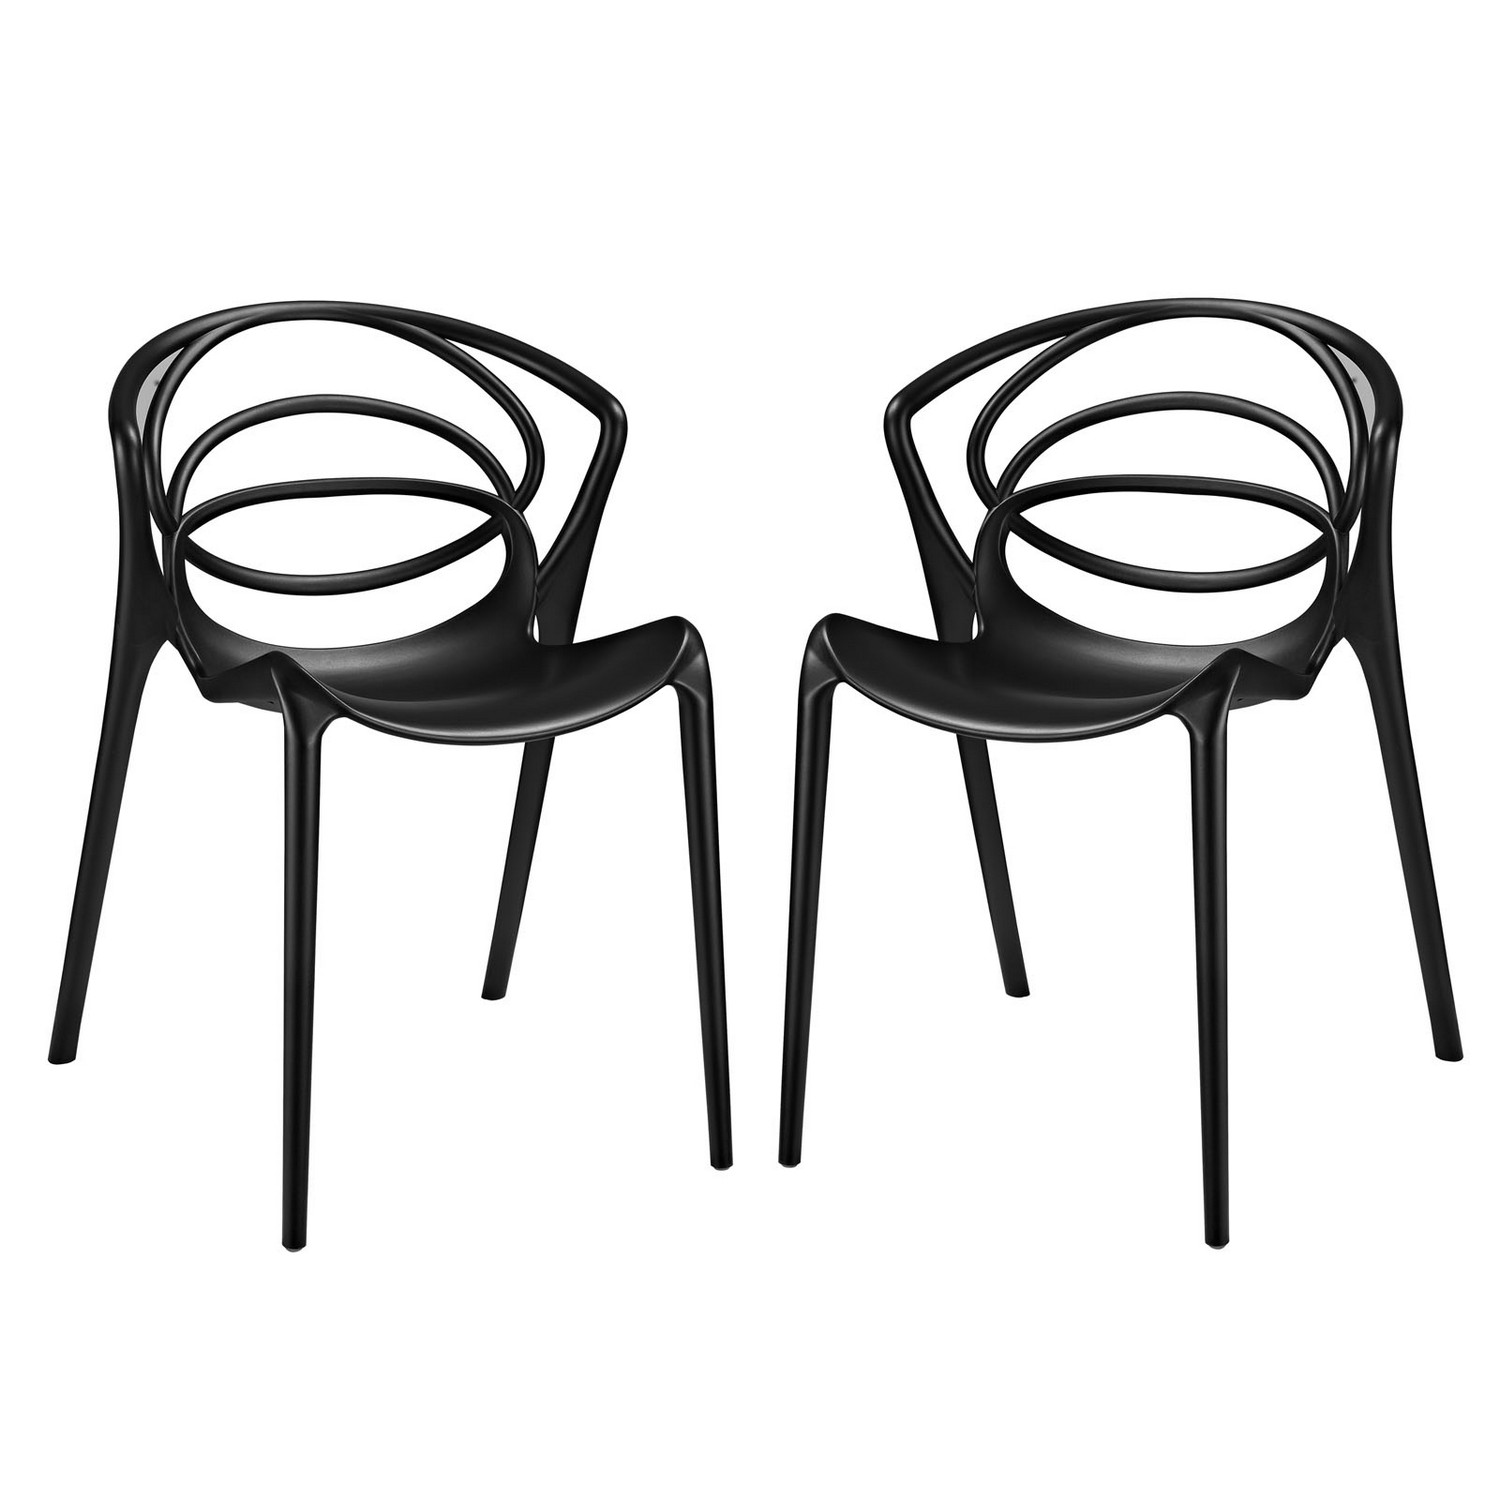 Modway Locus Dining Chair - Set of 2 - Black